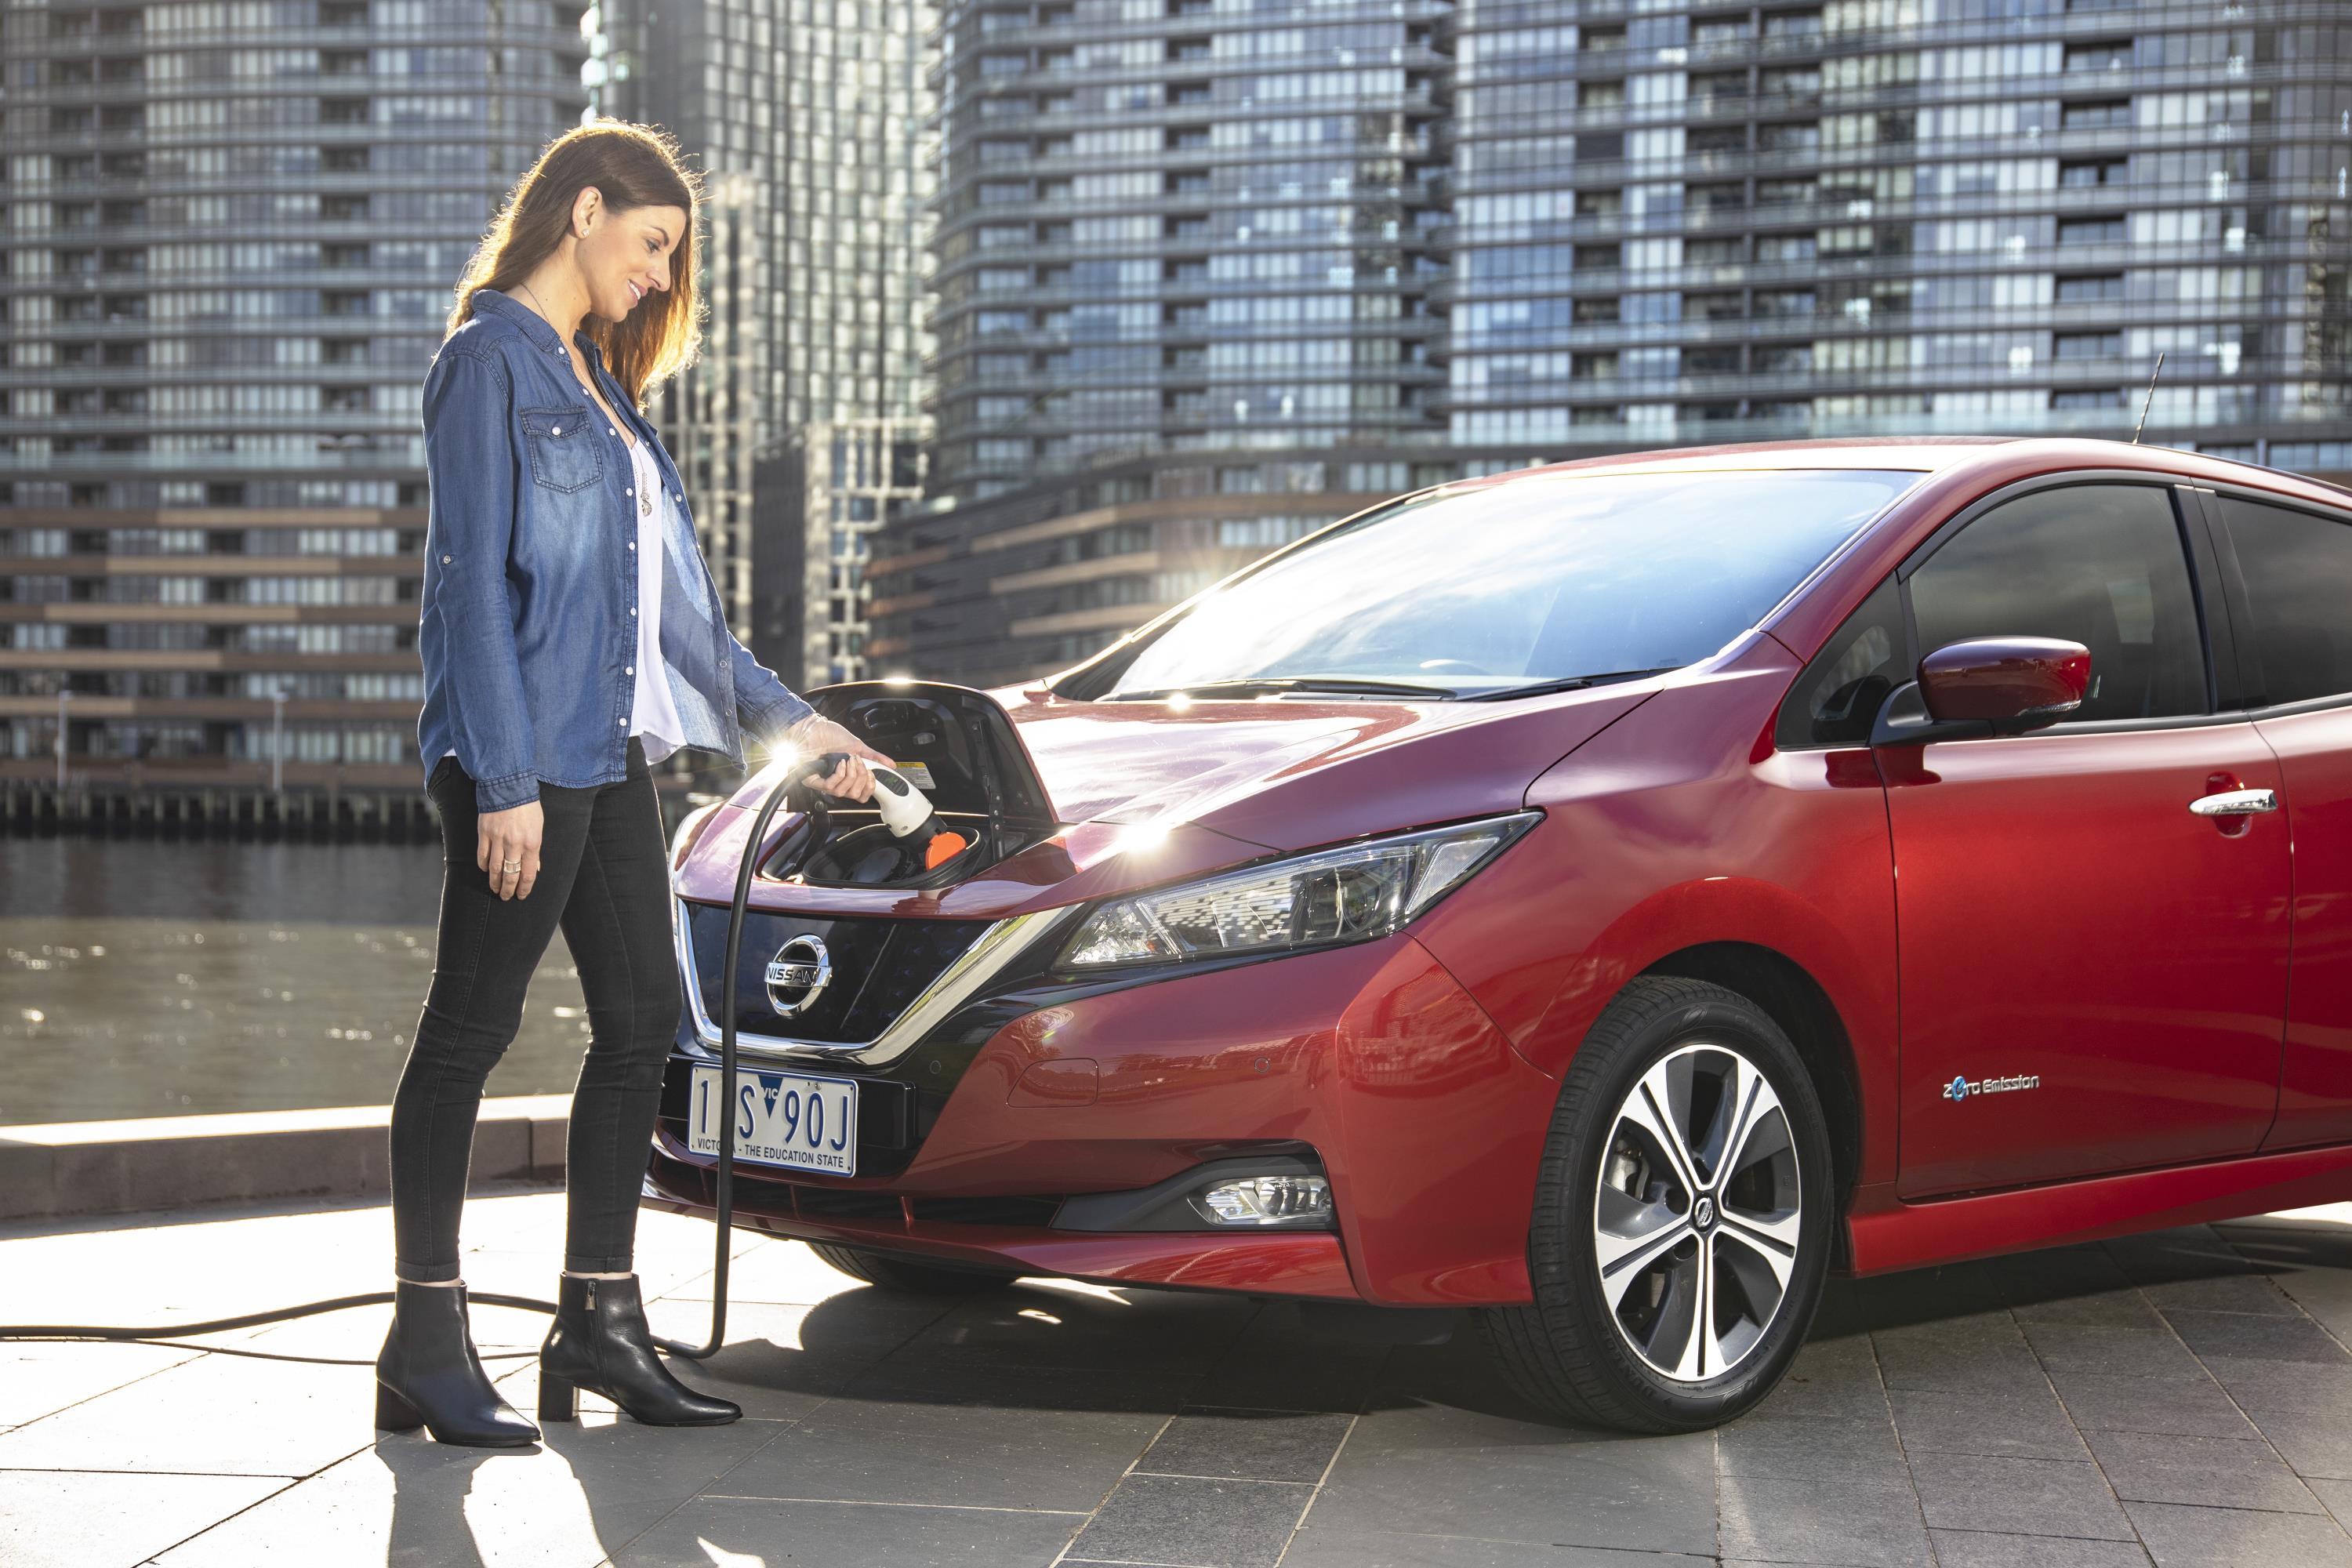 Nissan forms new Chargefox partnership